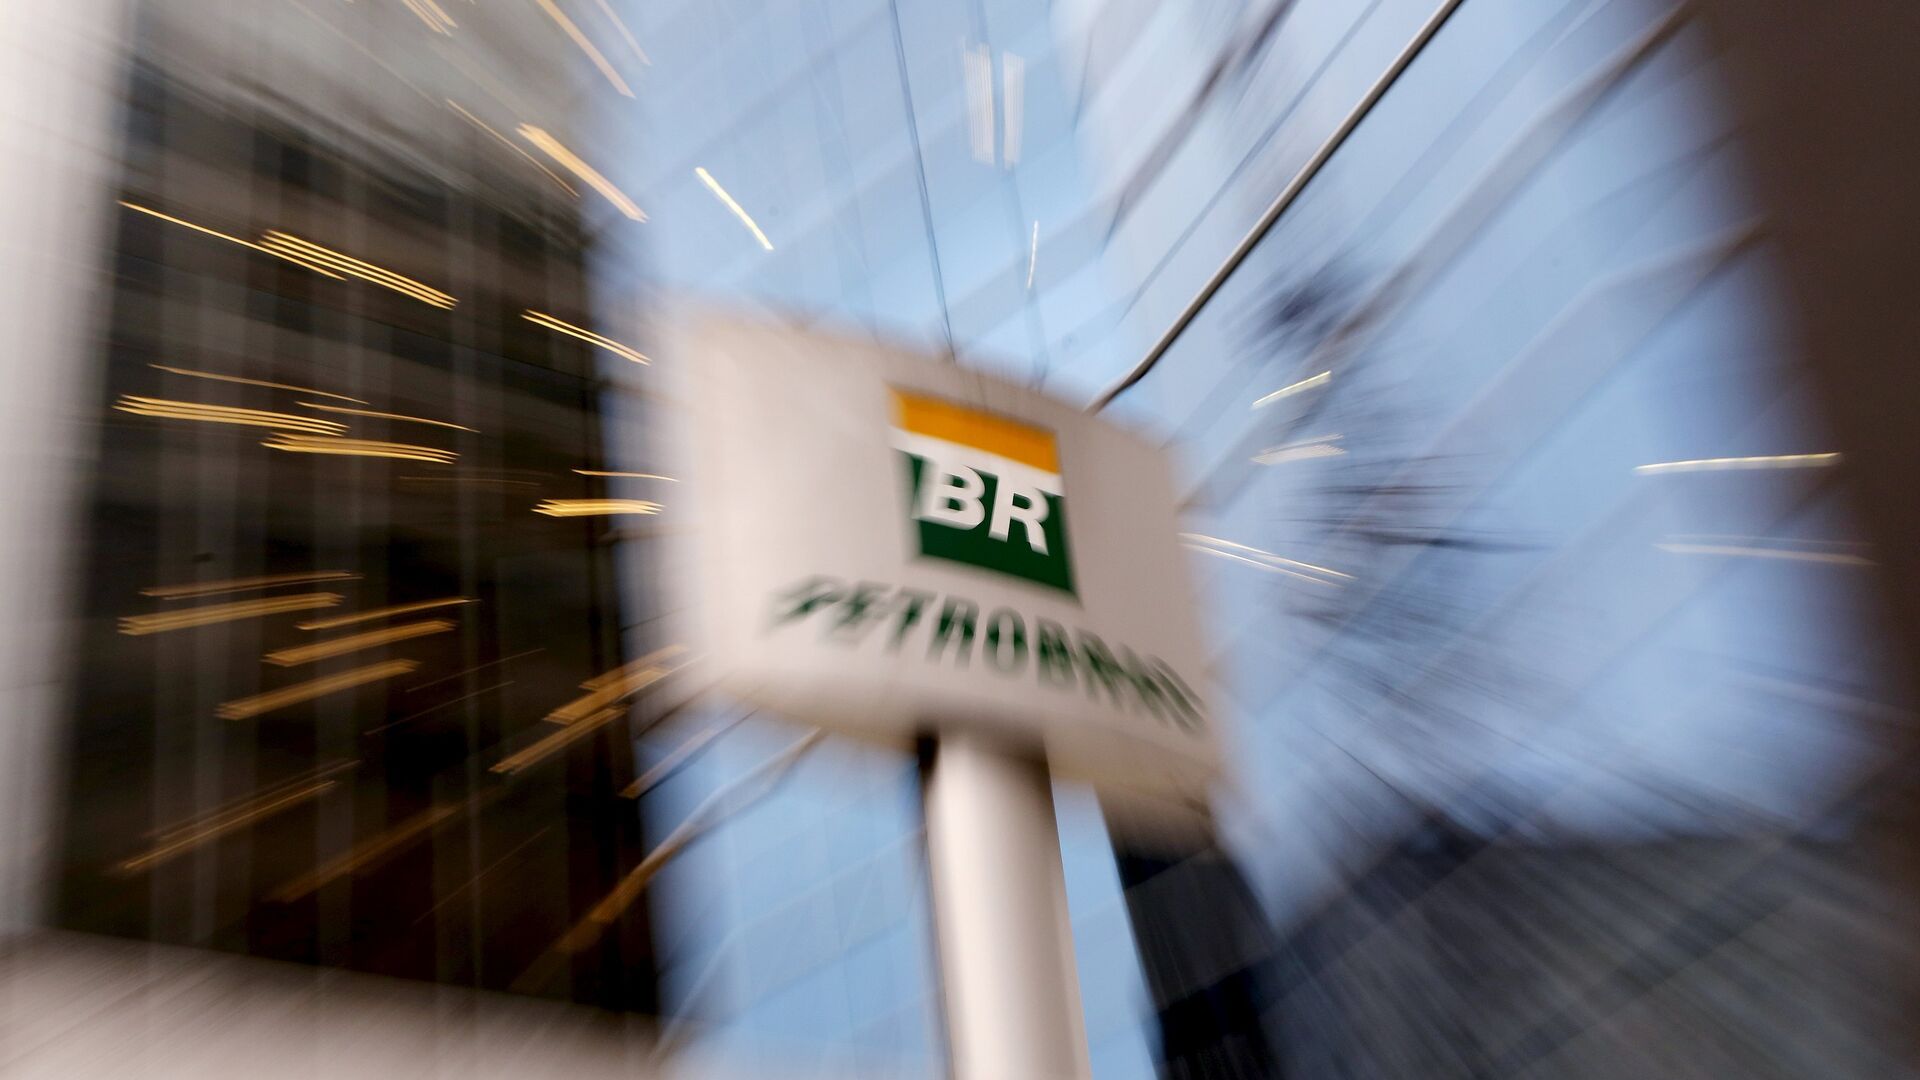 Petrobras dropped from the list of top global dividend payers. (Photo Internet reproduction)